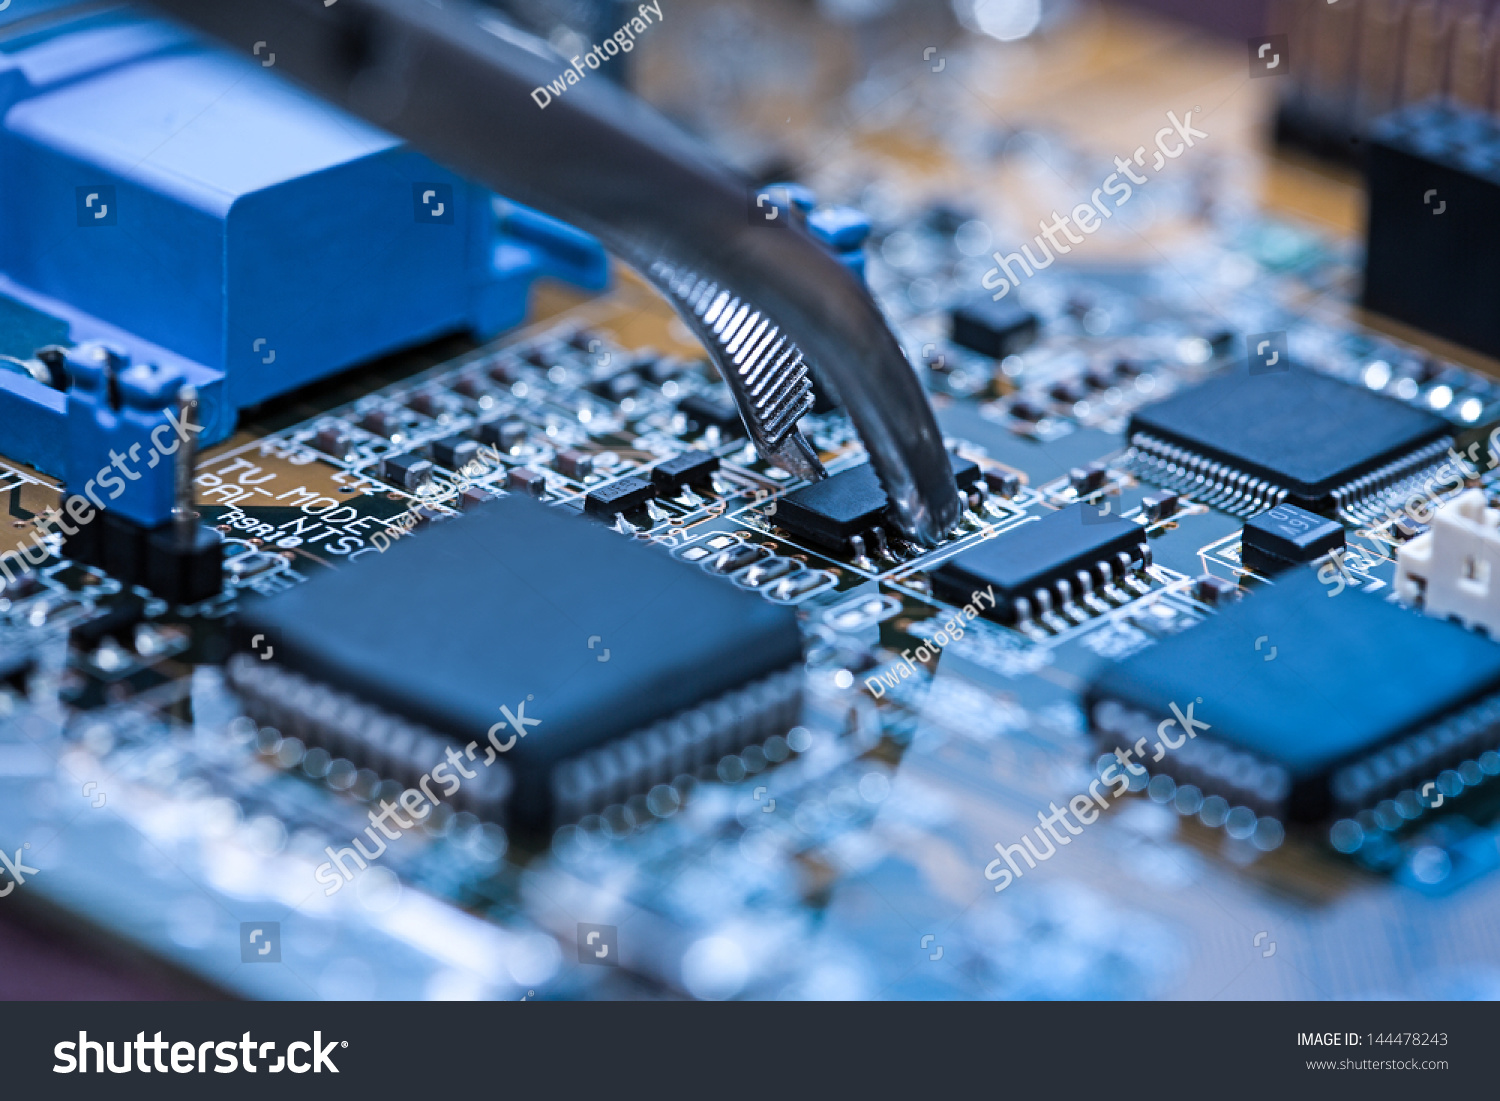 Close up on tweezers holding chip on computer circuit board. #144478243